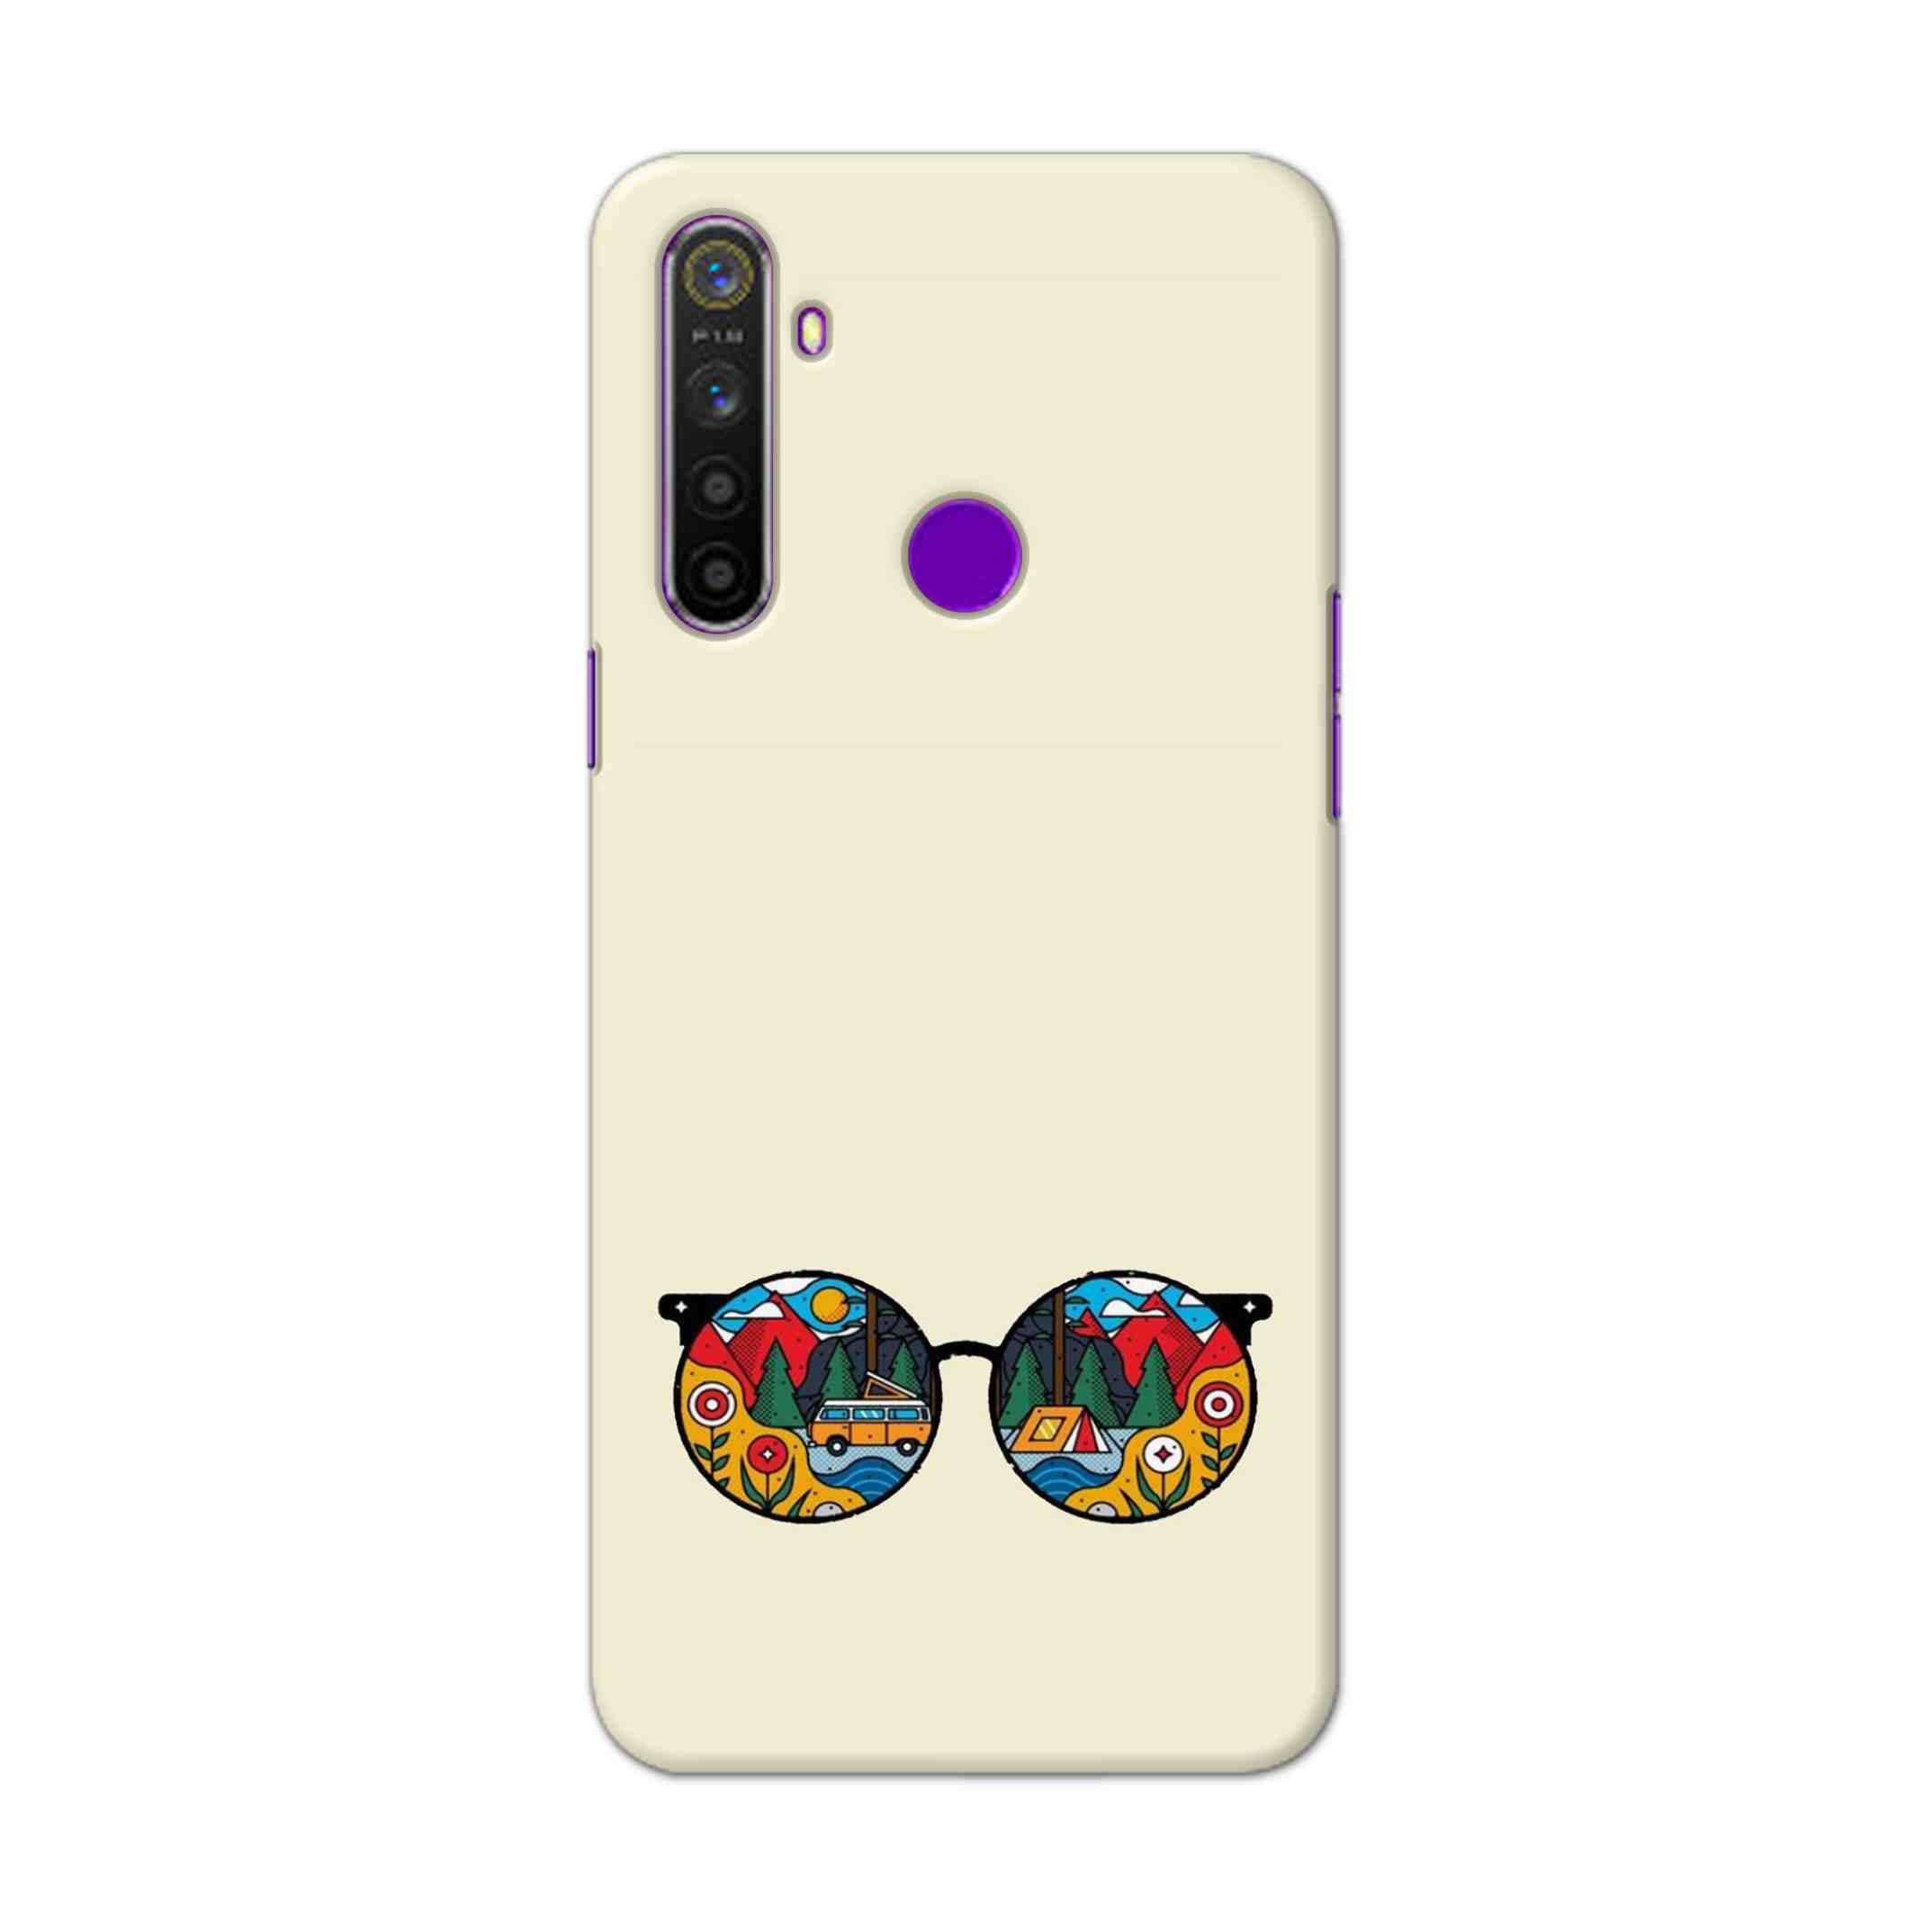 Buy Rainbow Sunglasses Hard Back Mobile Phone Case Cover For Realme 5 Pro Online